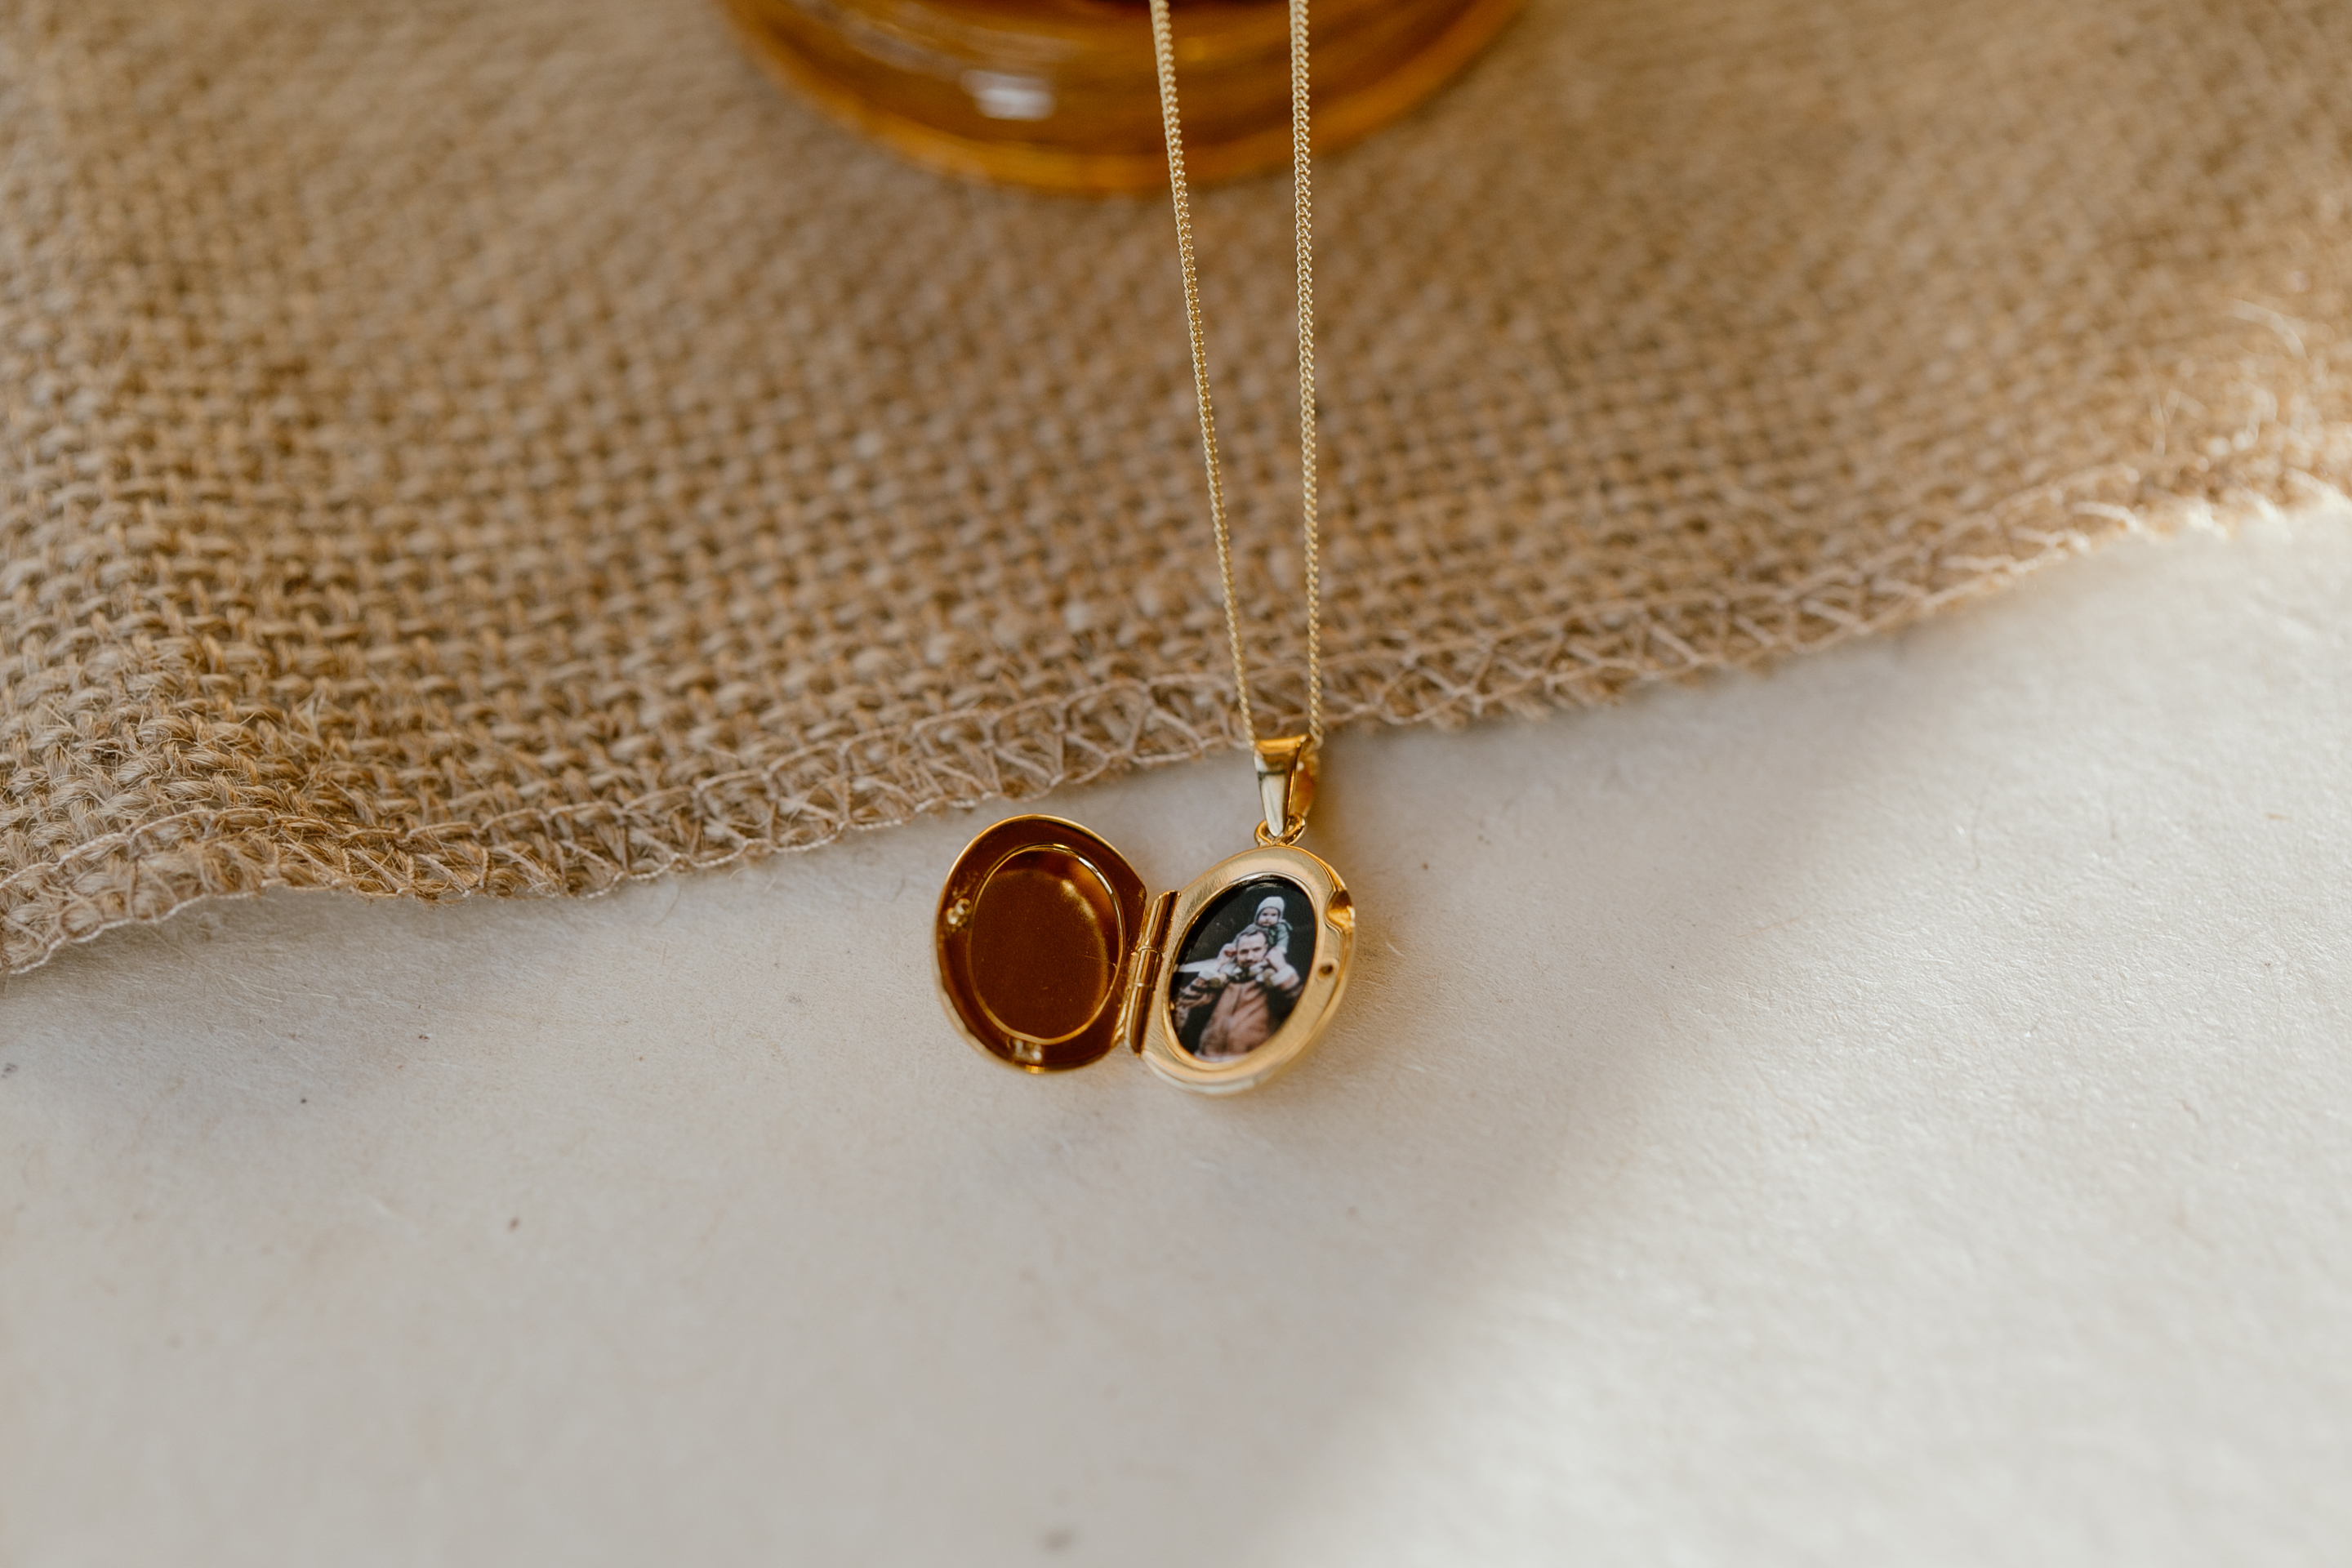 The Little Gold Oval Locket Necklace is back in stock.